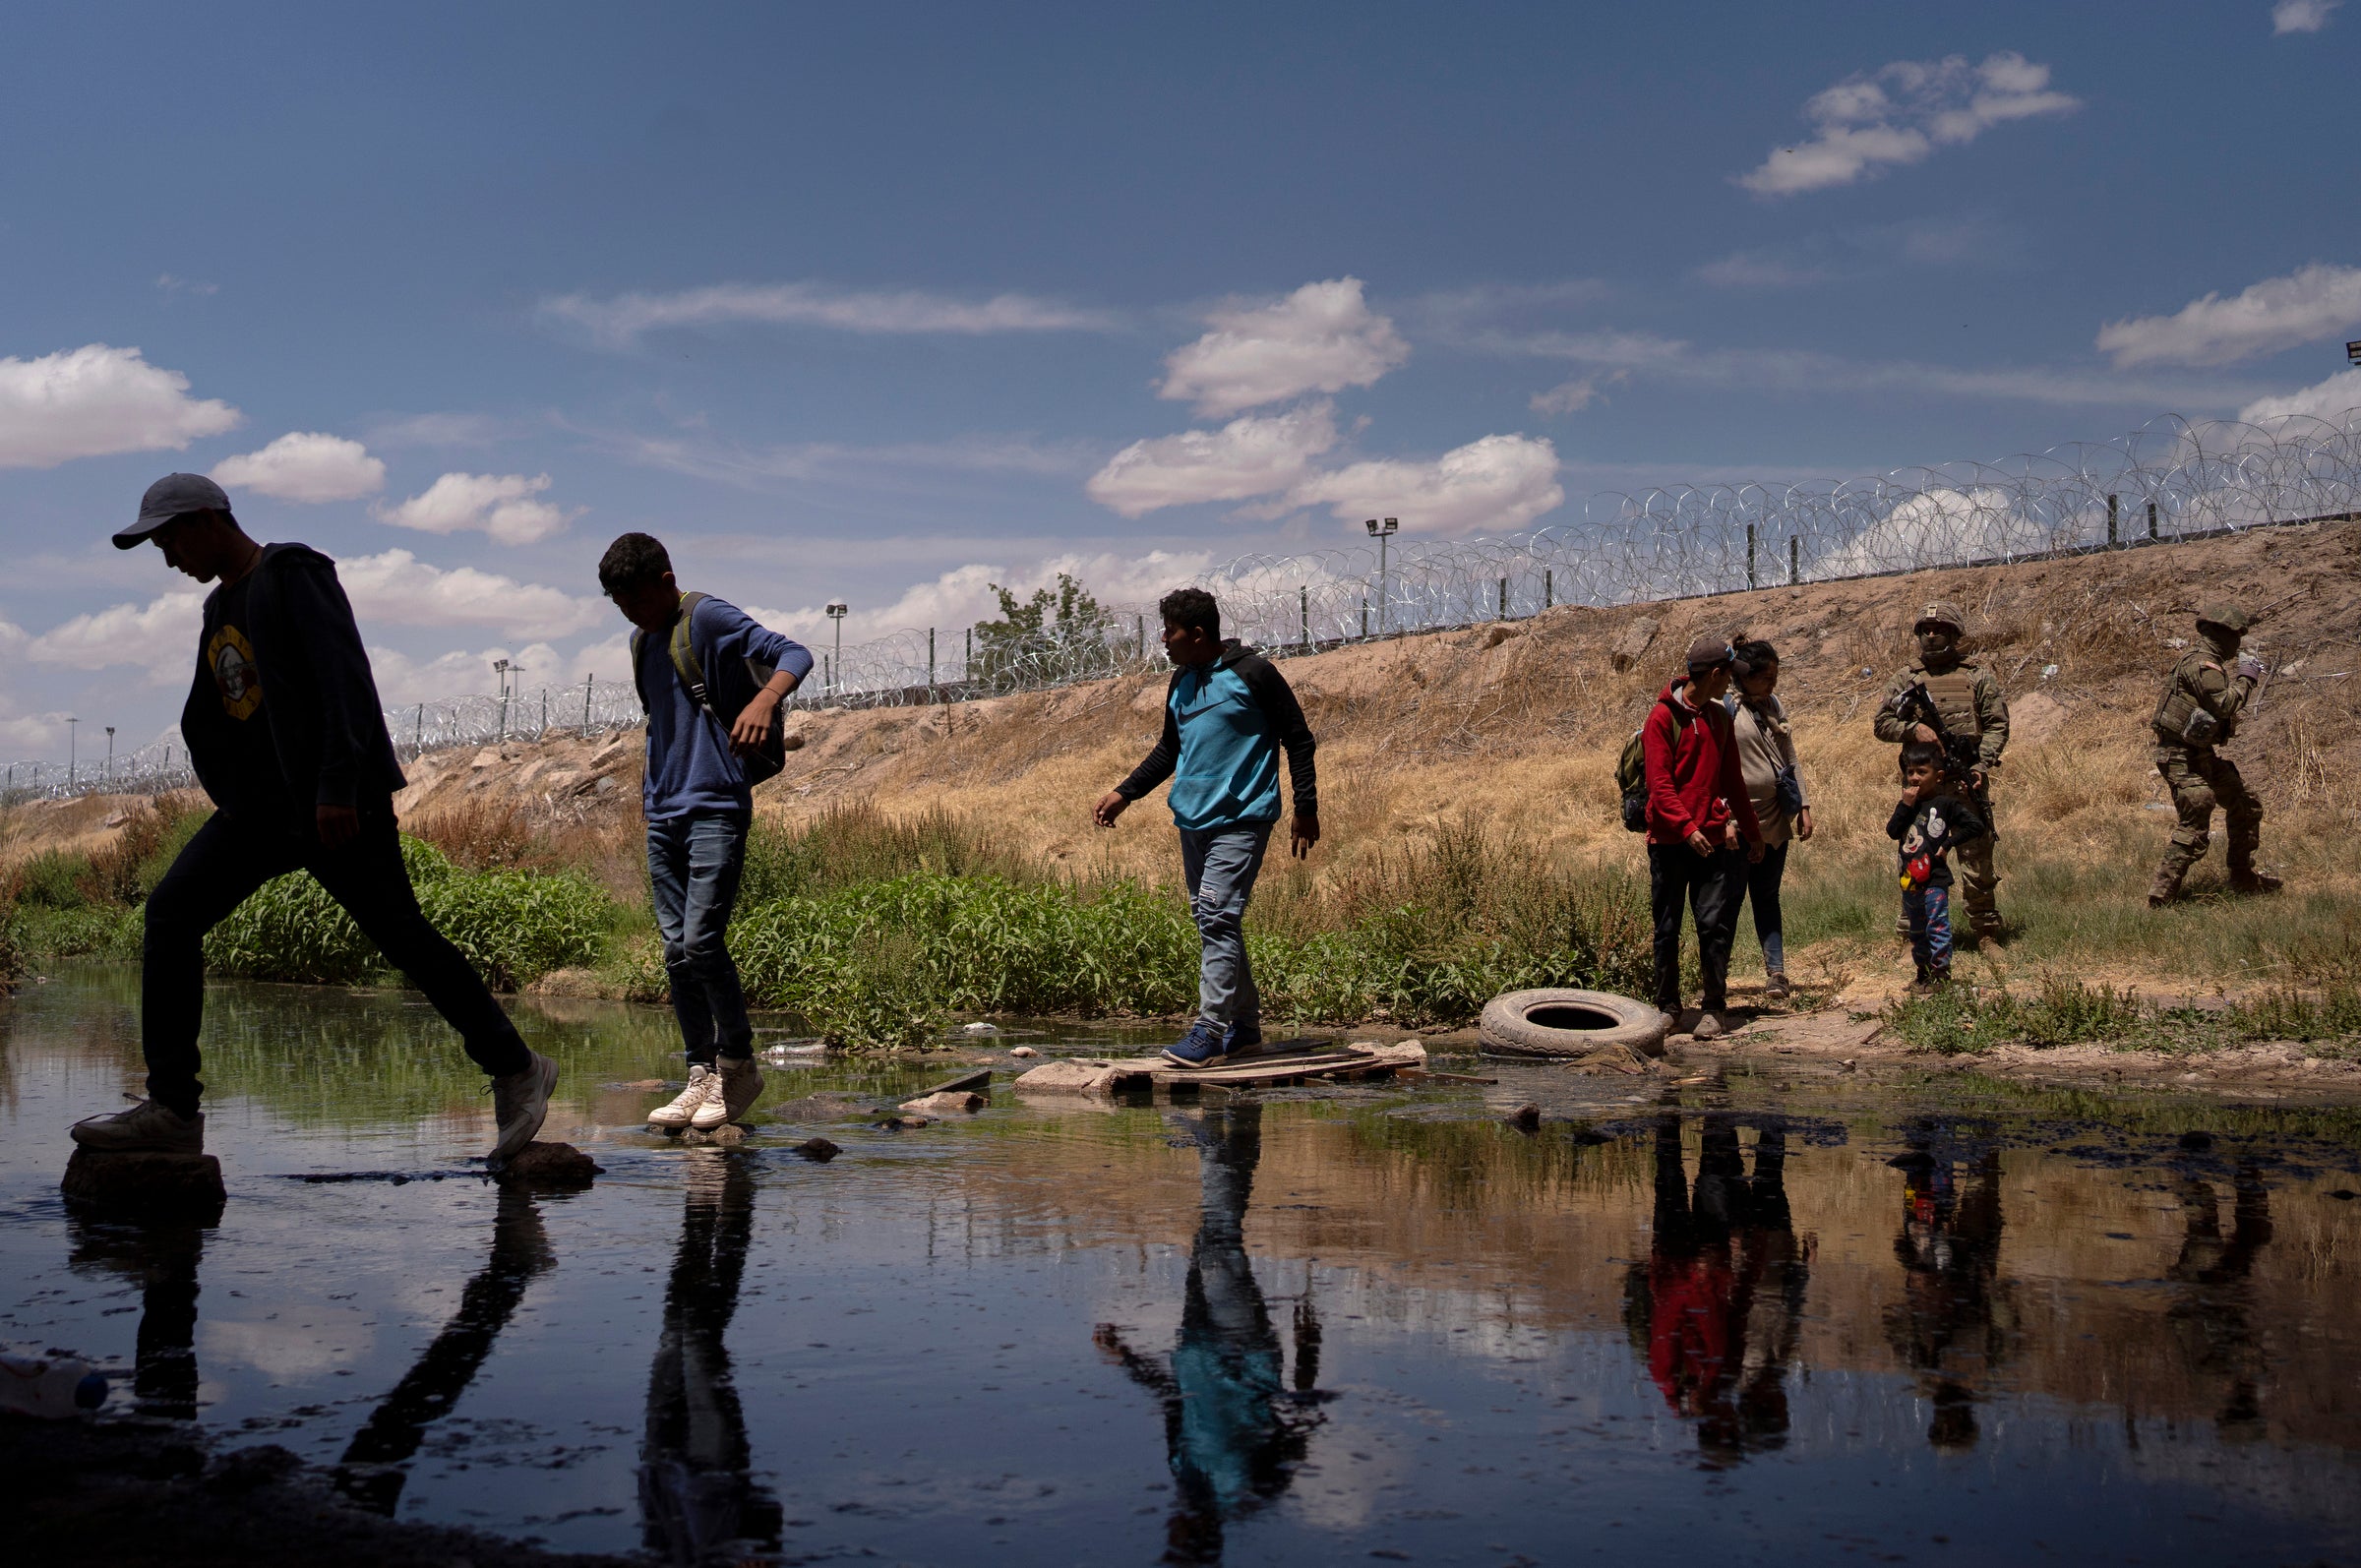 Migrants go back across the Rio Grande at Ciudad Juárez on 13 May after Texas National Guard members tell them to leave the spot where they had gathered under the Ysleta-Zaragoza Bridge at El Paso in hopes of surrendering themselves to seek asylum in the United States